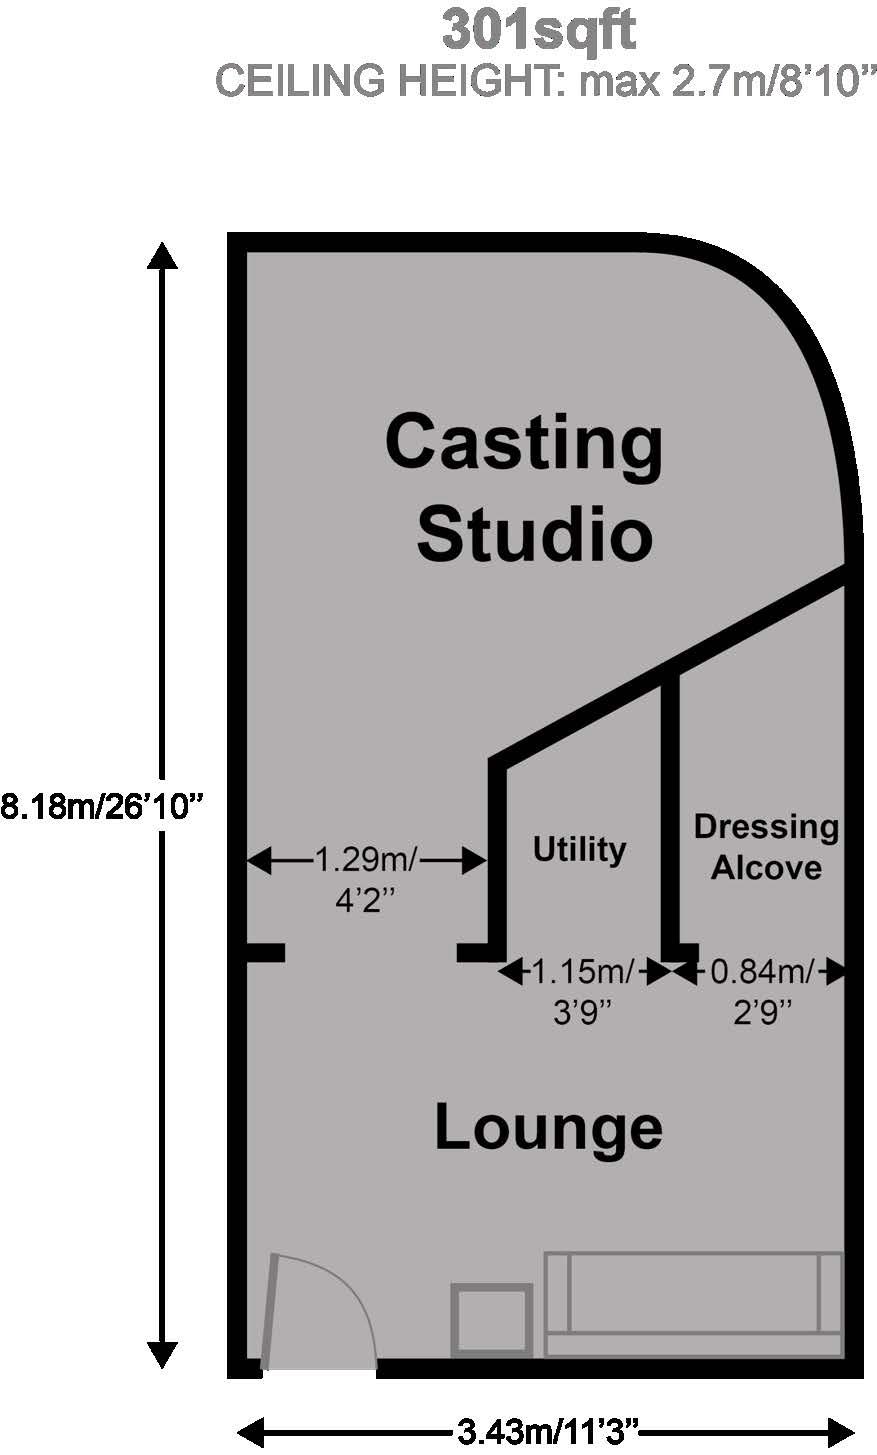 SINGAPORE STUDIO - LEVEL FOUR Casting Studio SPECIFICATIONS - 301 sq ft of space - 2 X 2 hp